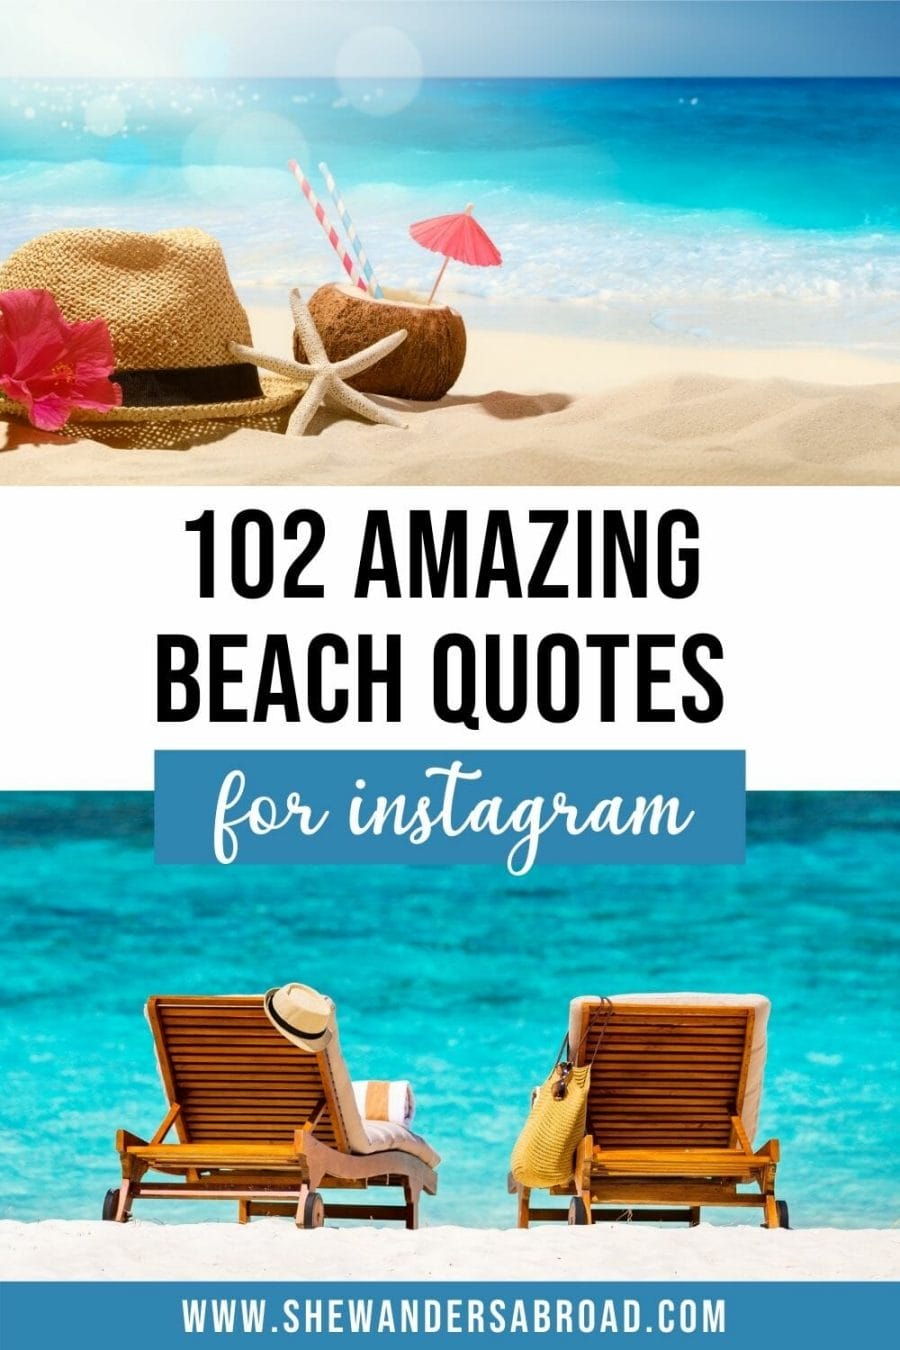 Amazing Beach Captions for Instagram (Quotes, Puns and More!)